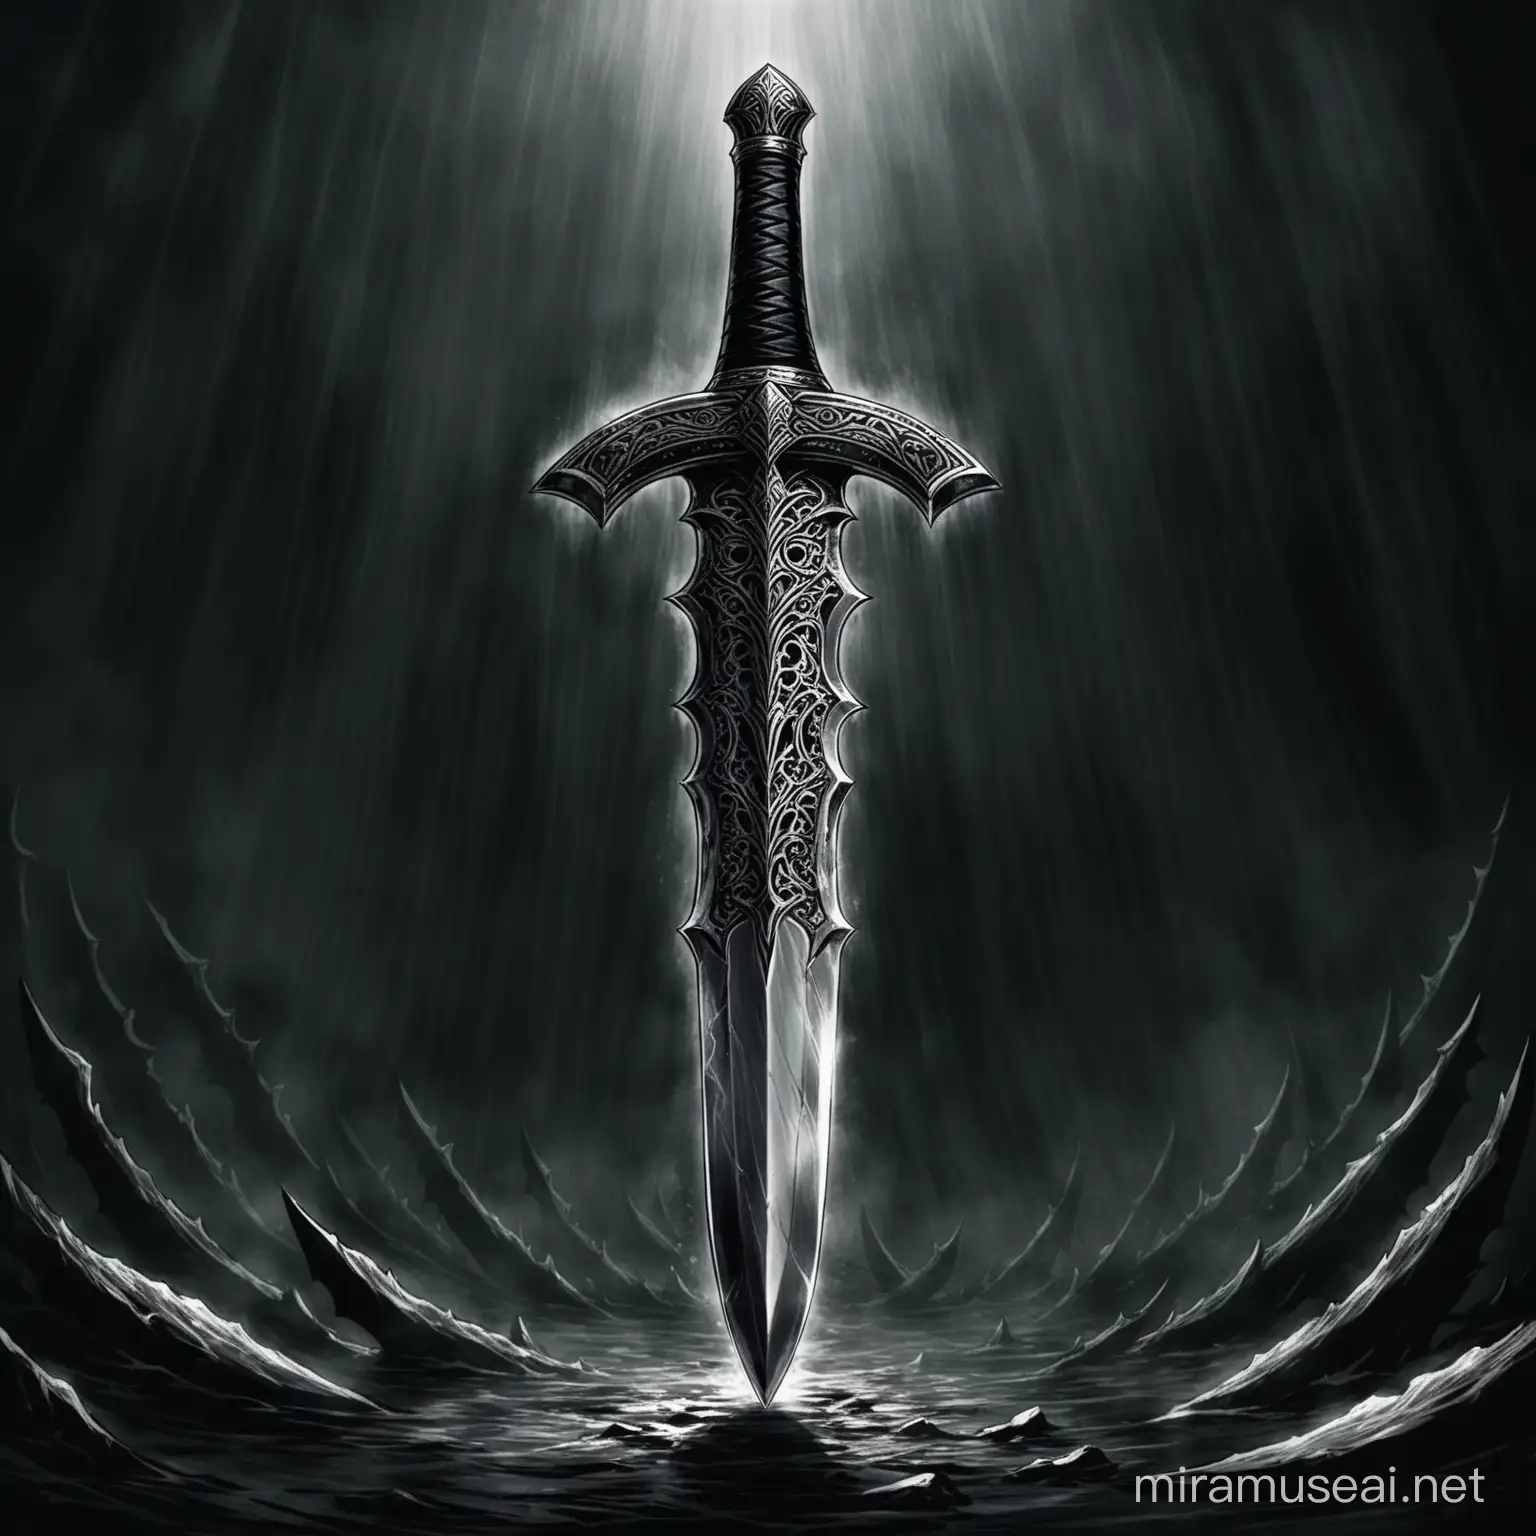 The dagger that is the strongest dagger
And a dagger that has access to the world of the dead
The dagger is dark and deadly
A large and terrifying dagger
black magic angry kill dead very very very very very very big
dagger manster very very big strongest dagger